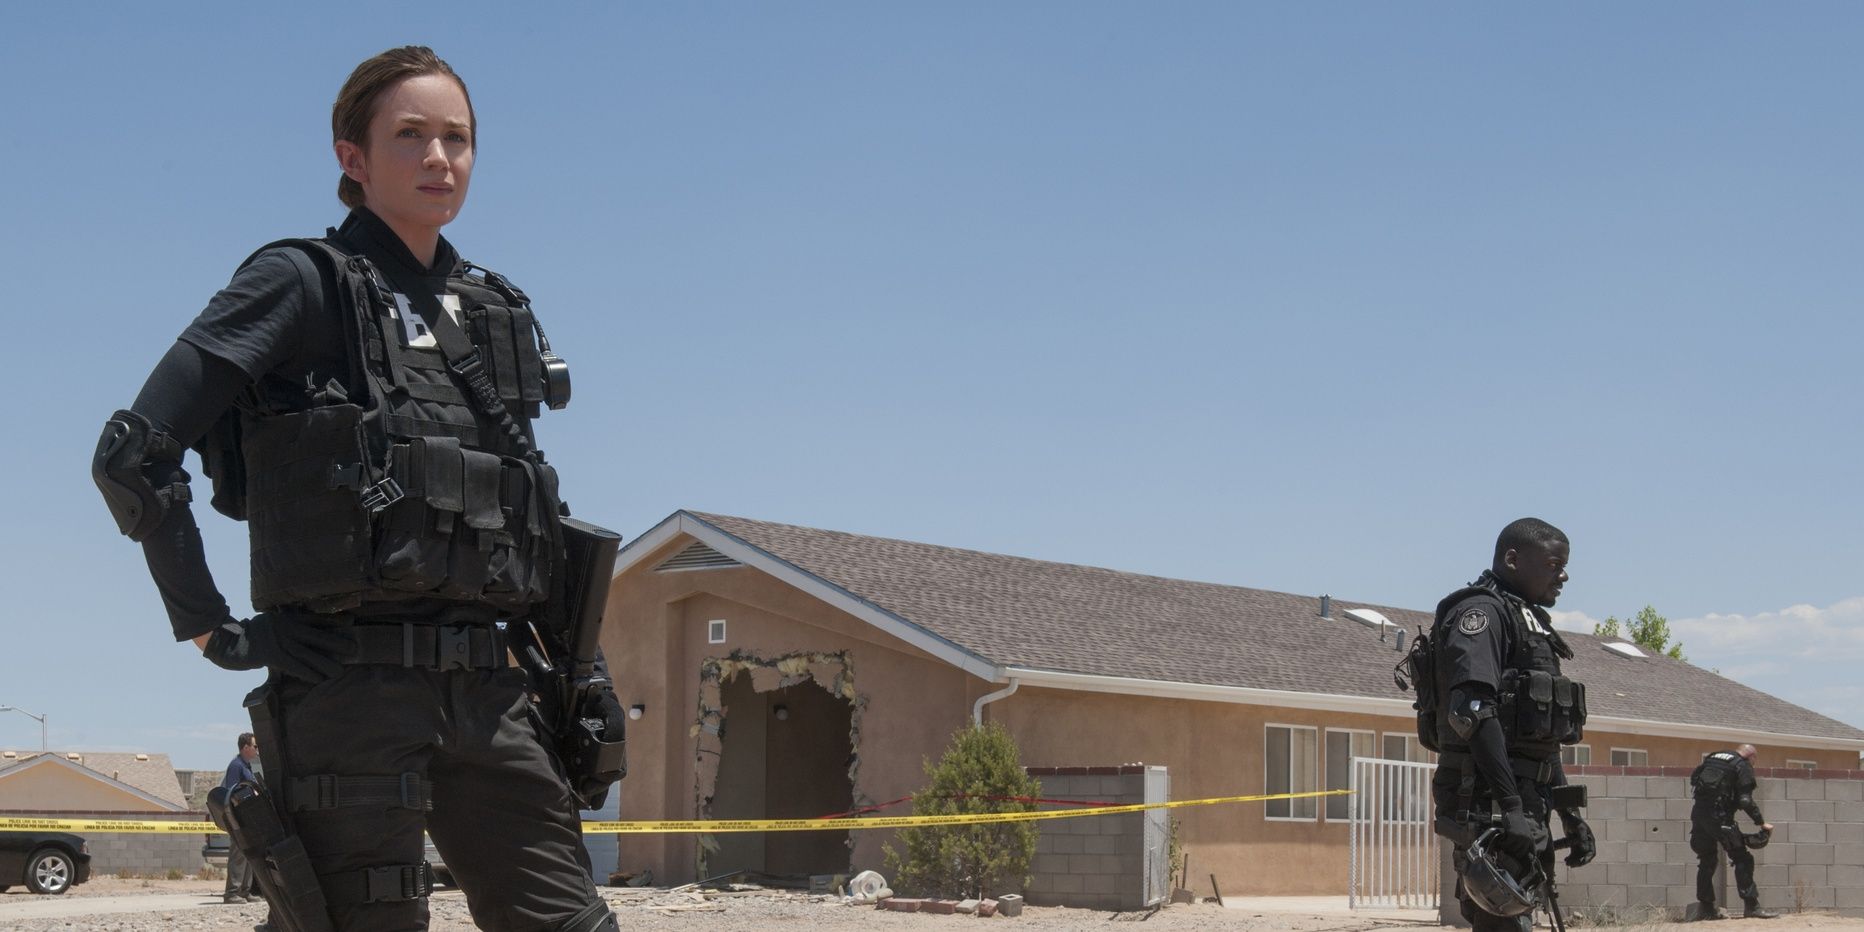 Emily Blunt standing in front of a house in uniform in Sicario.